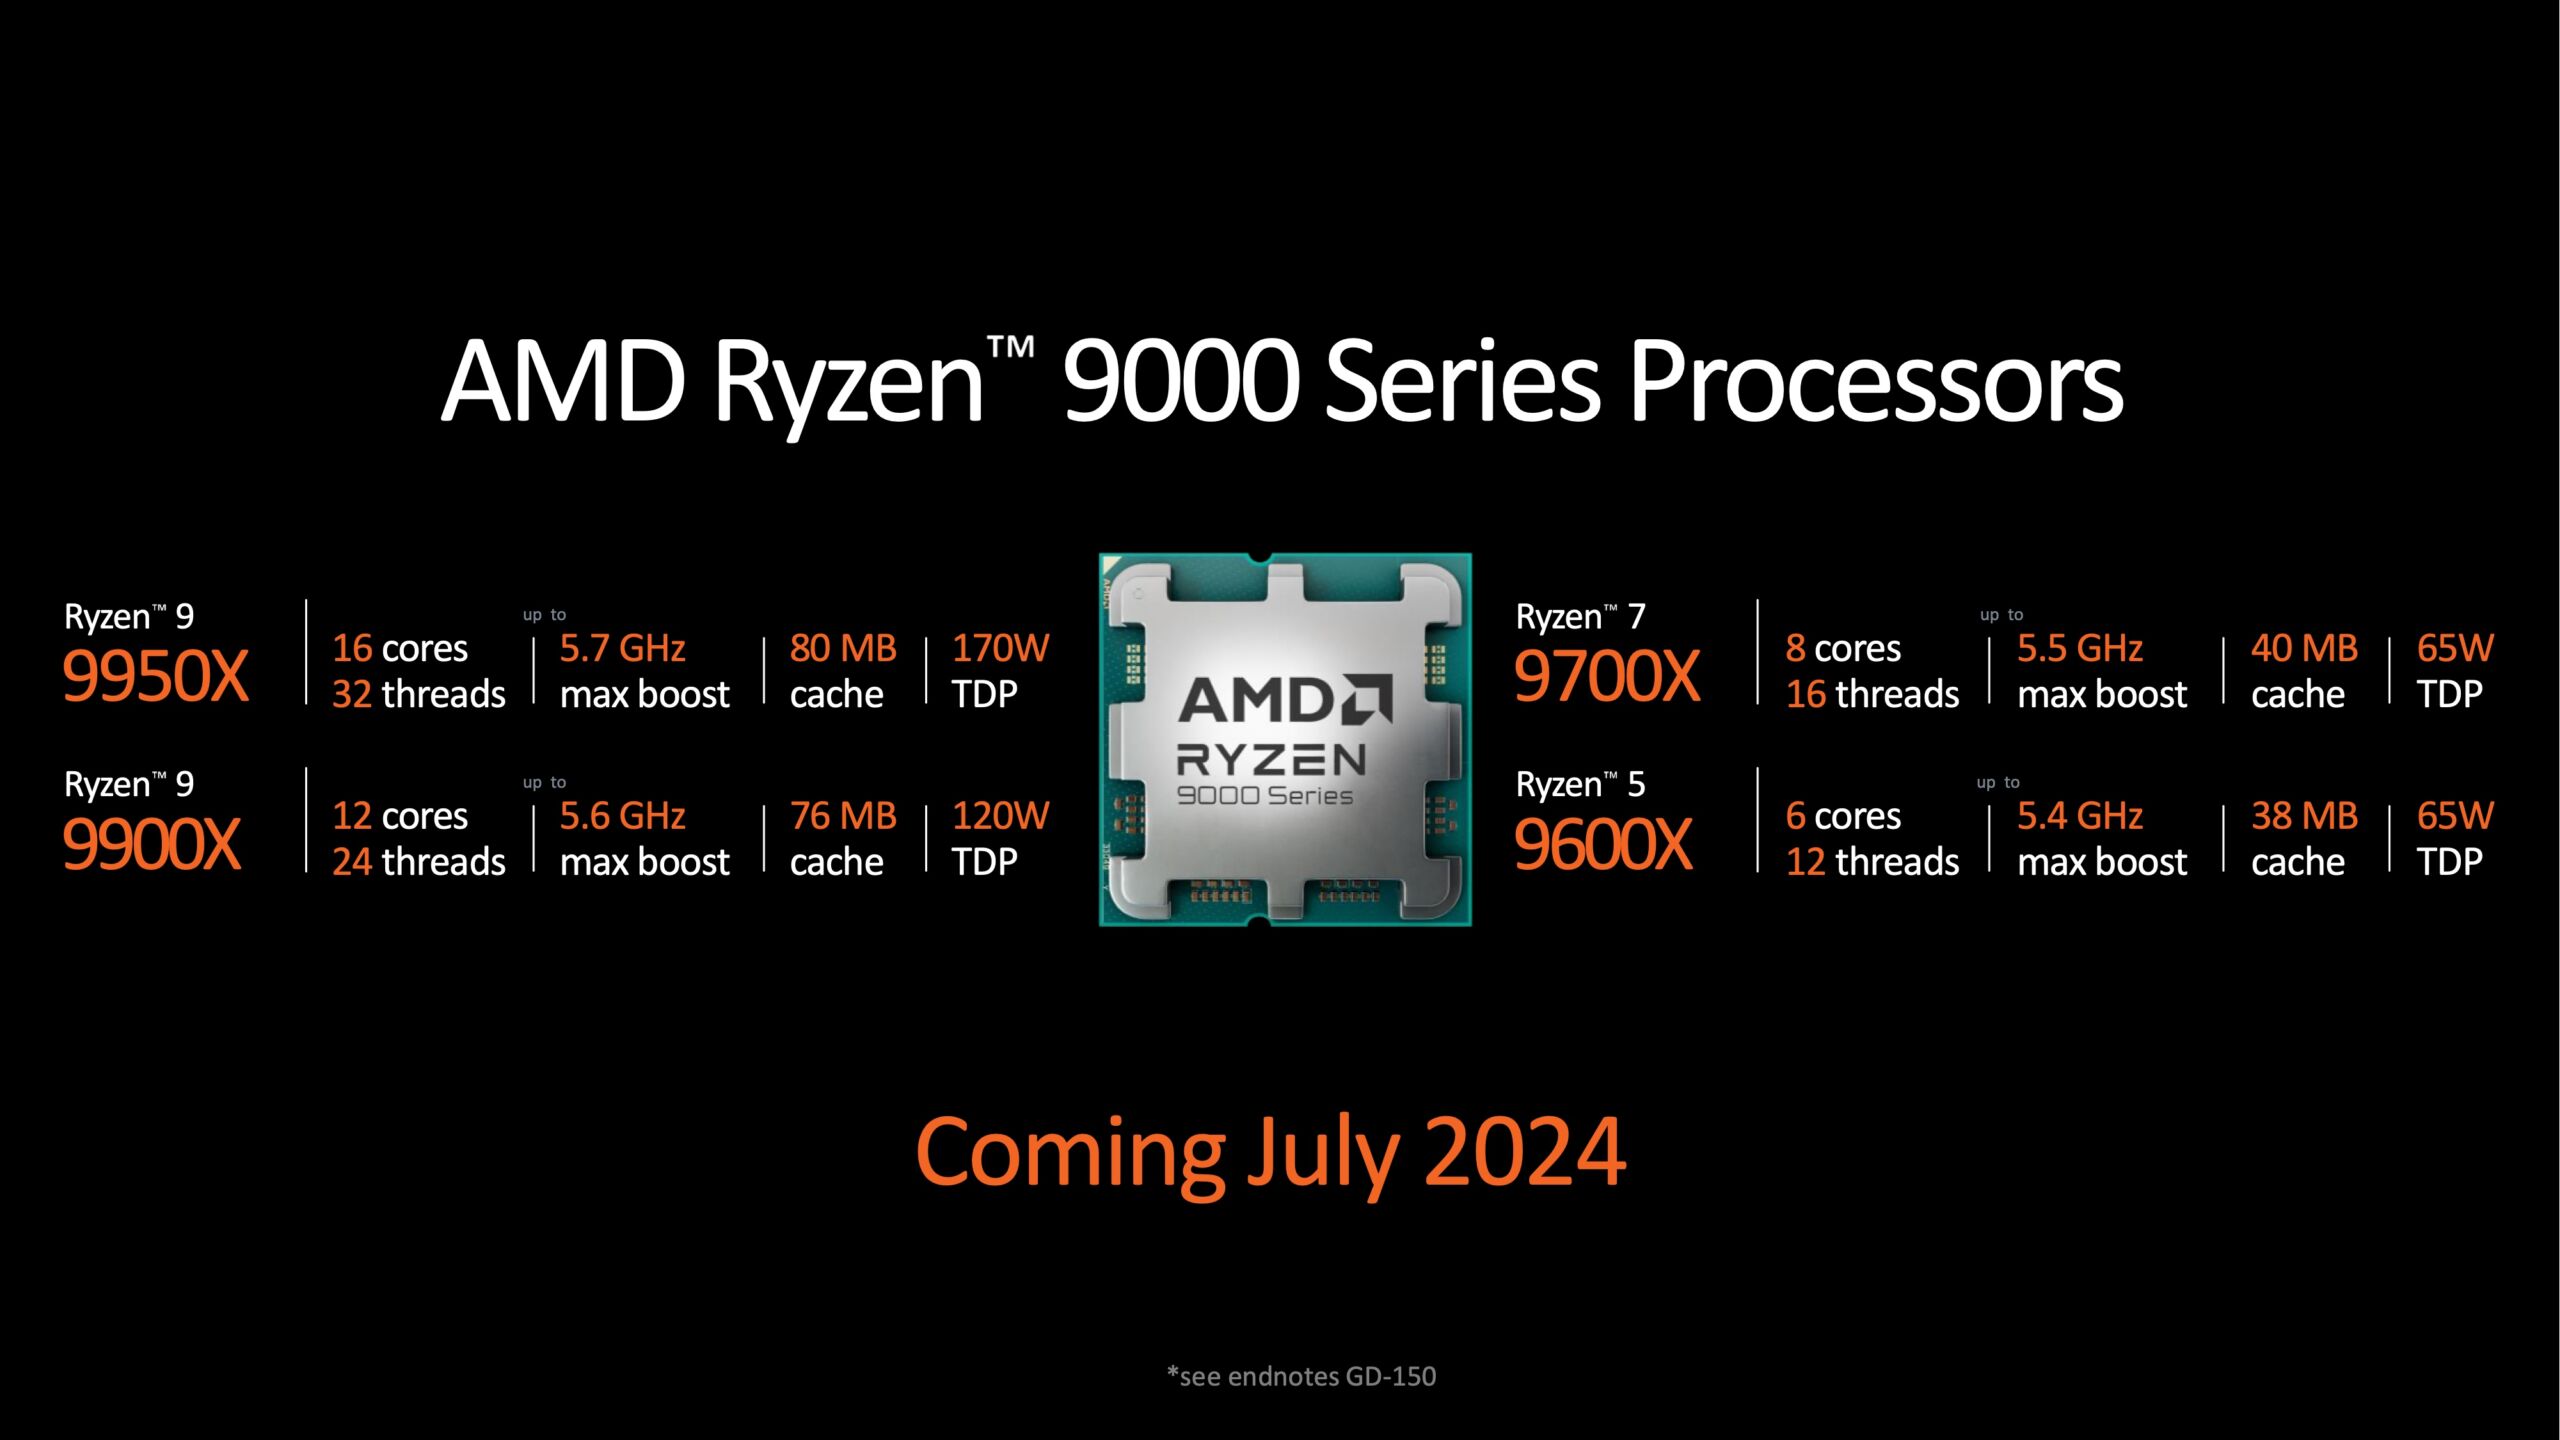 A slides showing the AMD Ryzen 900 series chip lineup from AMD